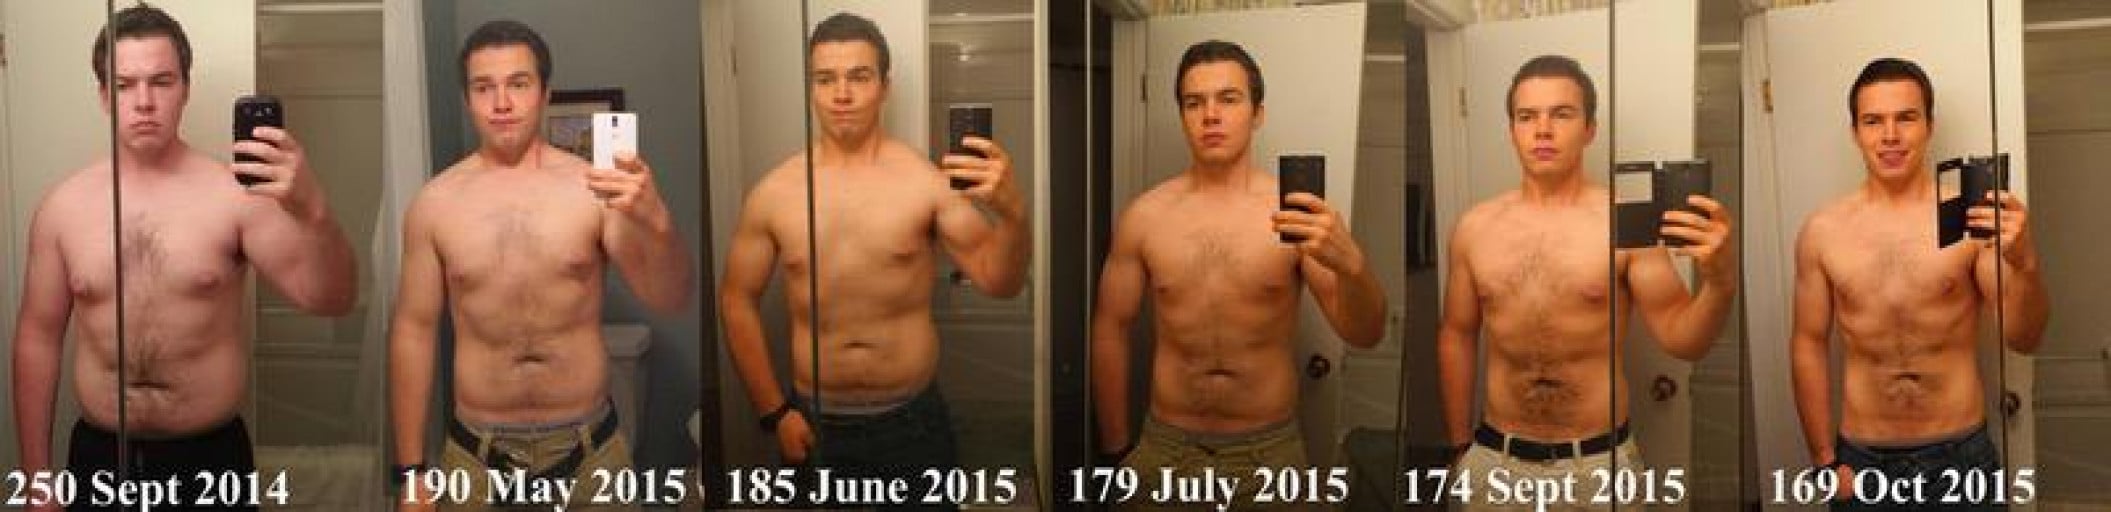 A picture of a 5'11" male showing a weight loss from 250 pounds to 169 pounds. A respectable loss of 81 pounds.